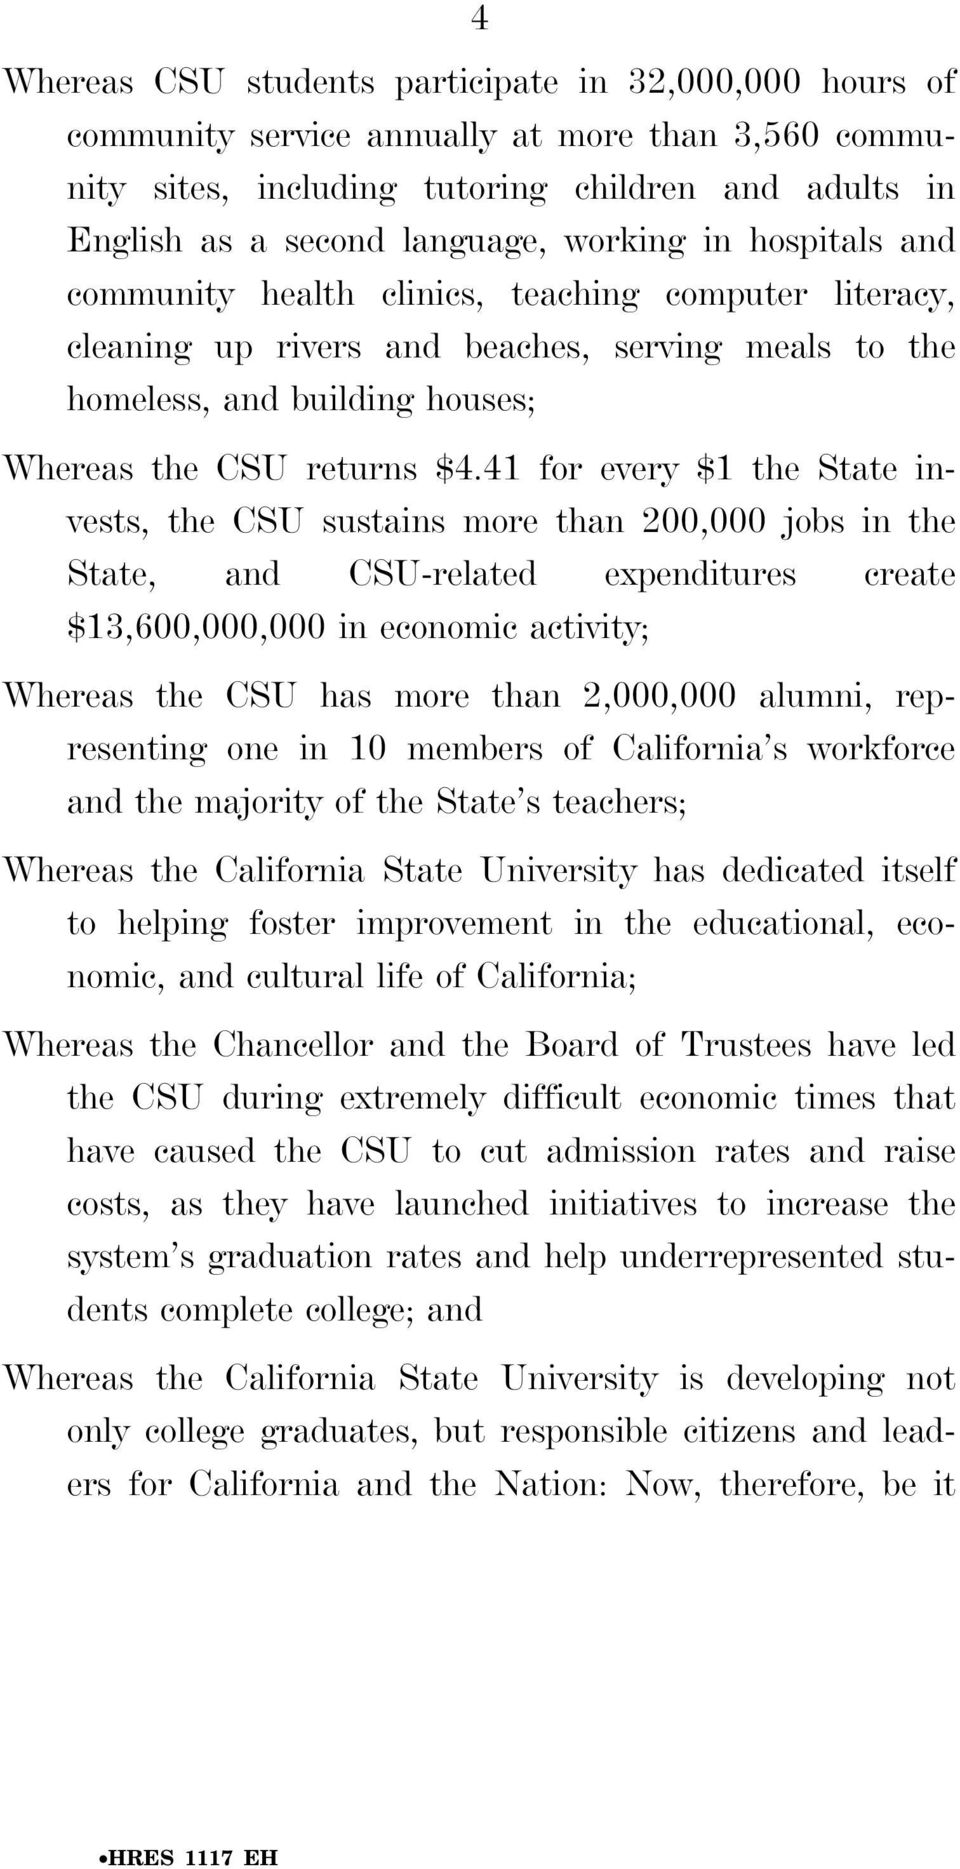 41 for every $1 the State invests, the CSU sustains more than 200,000 jobs in the State, and CSU-related expenditures create $13,600,000,000 in economic activity; Whereas the CSU has more than